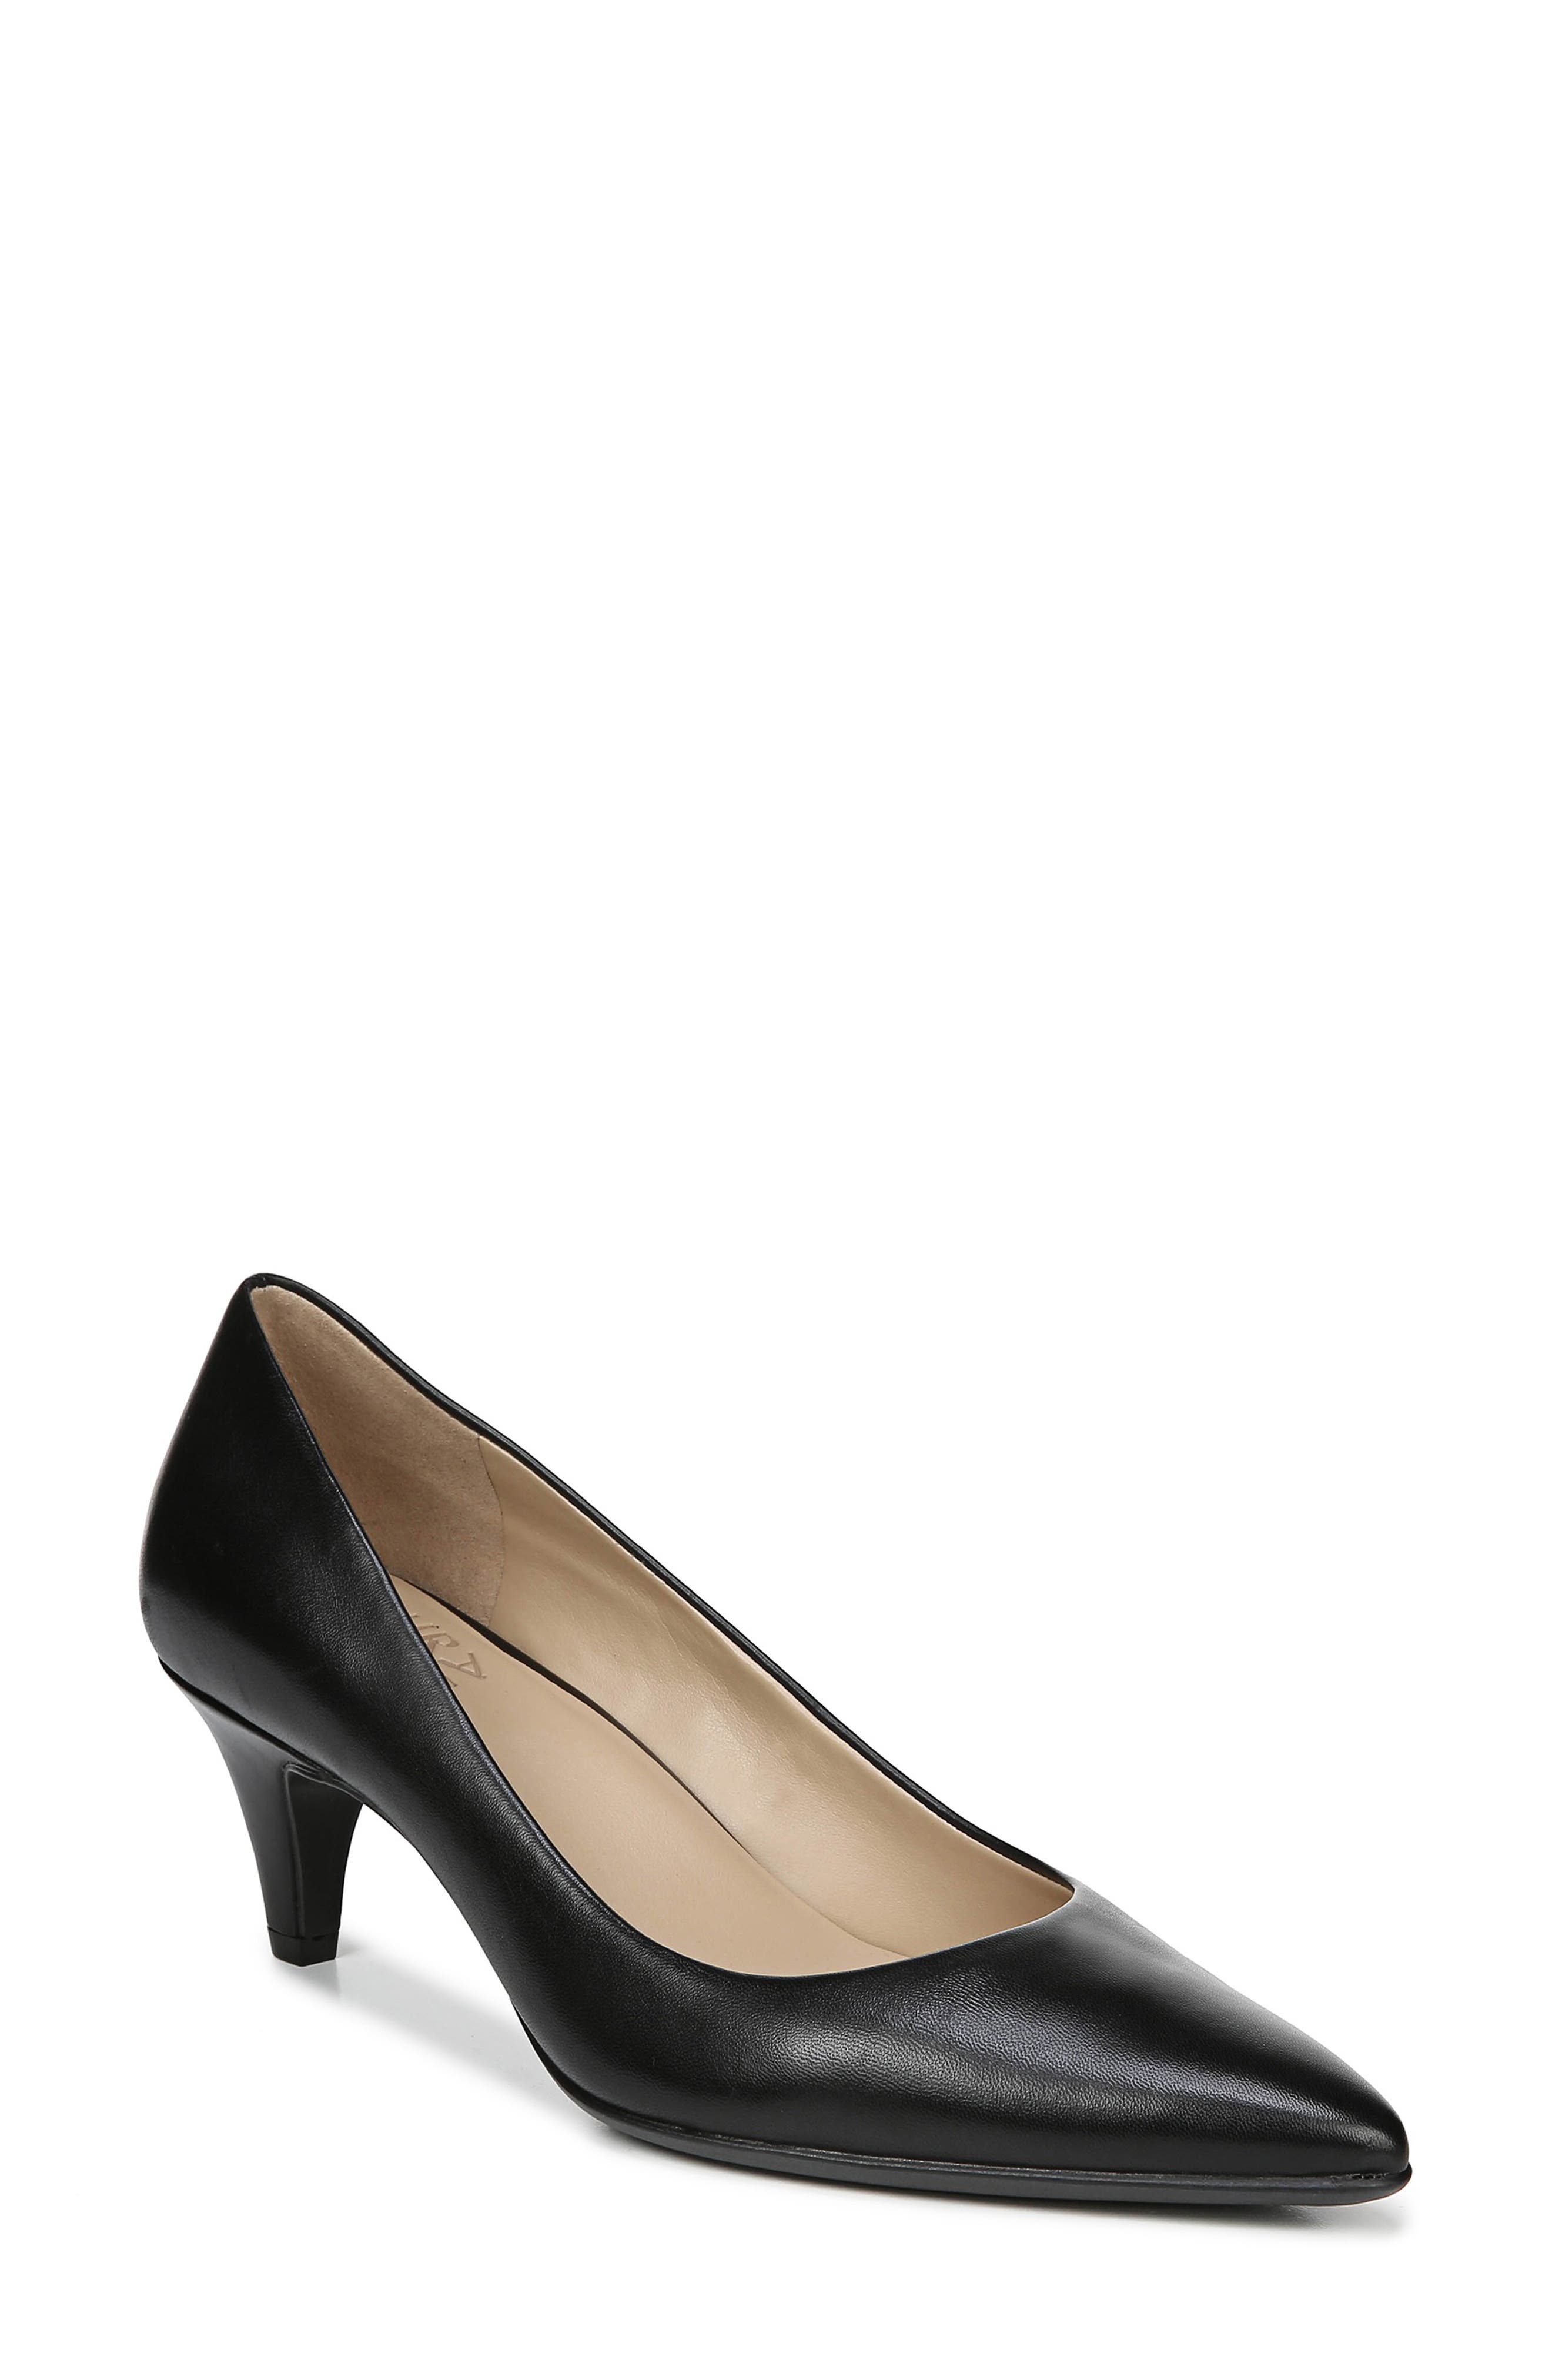 All Women's Sale Wide Shoes | Nordstrom